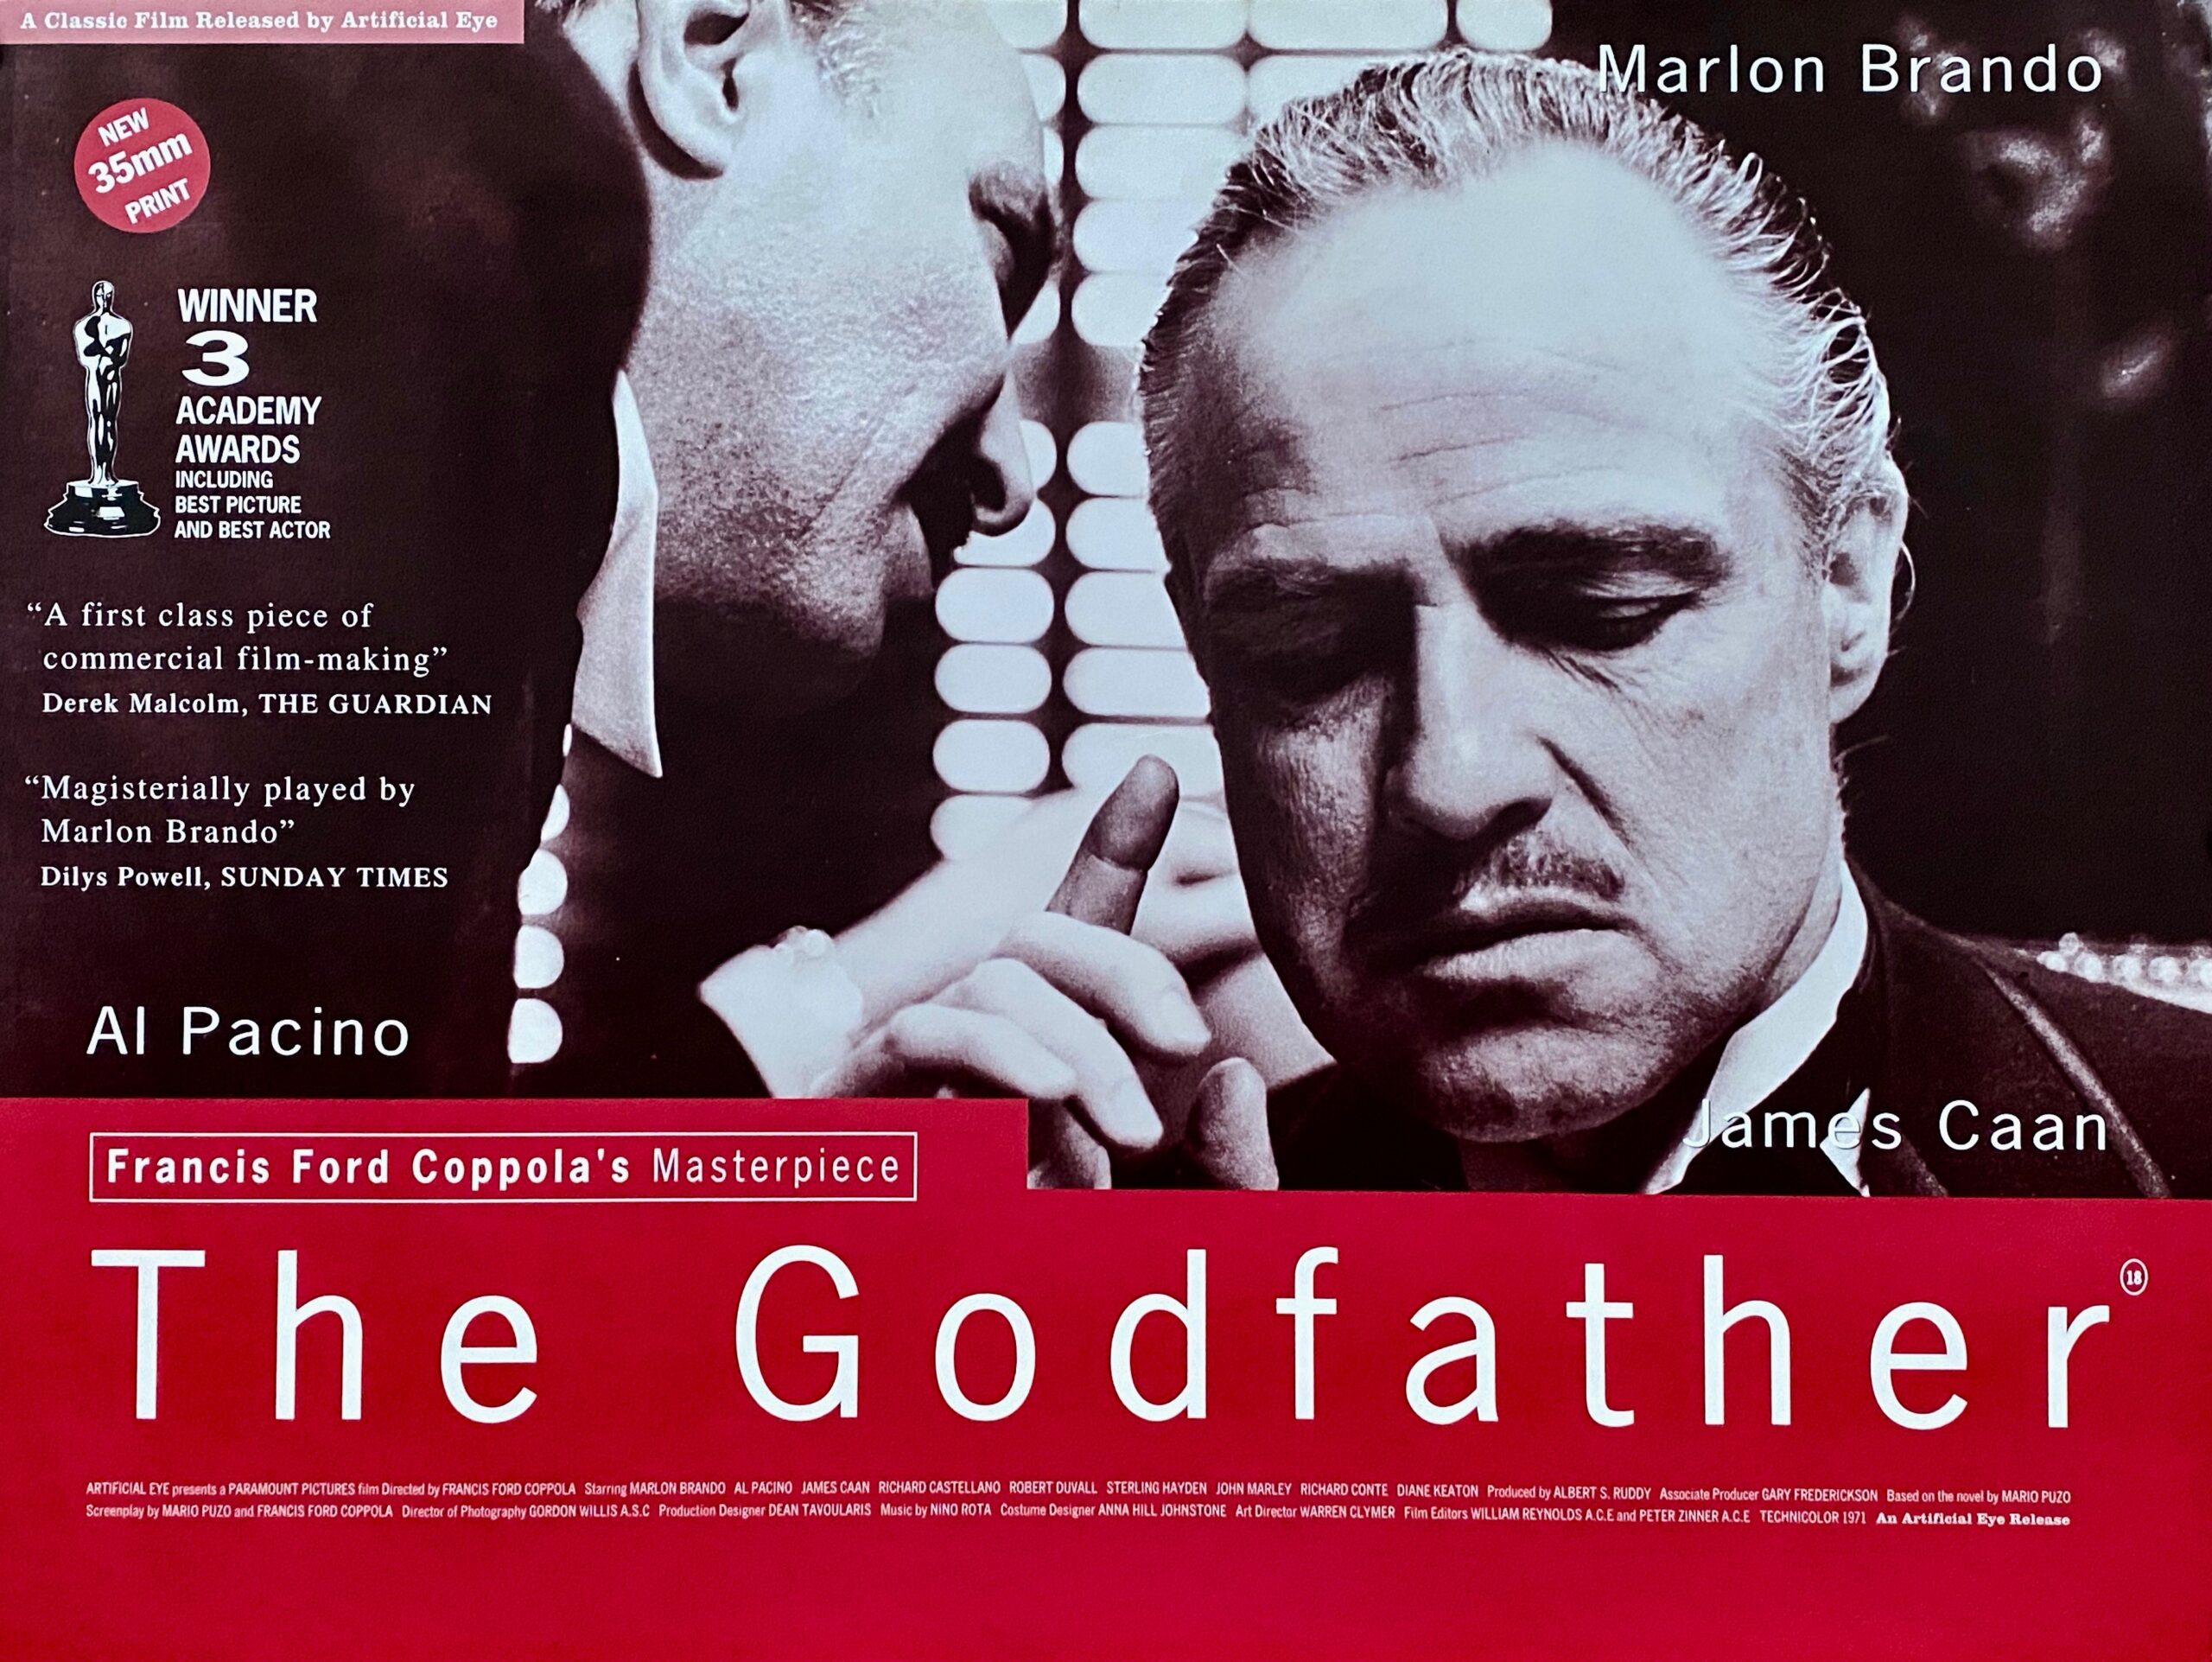 the godfather film review essay